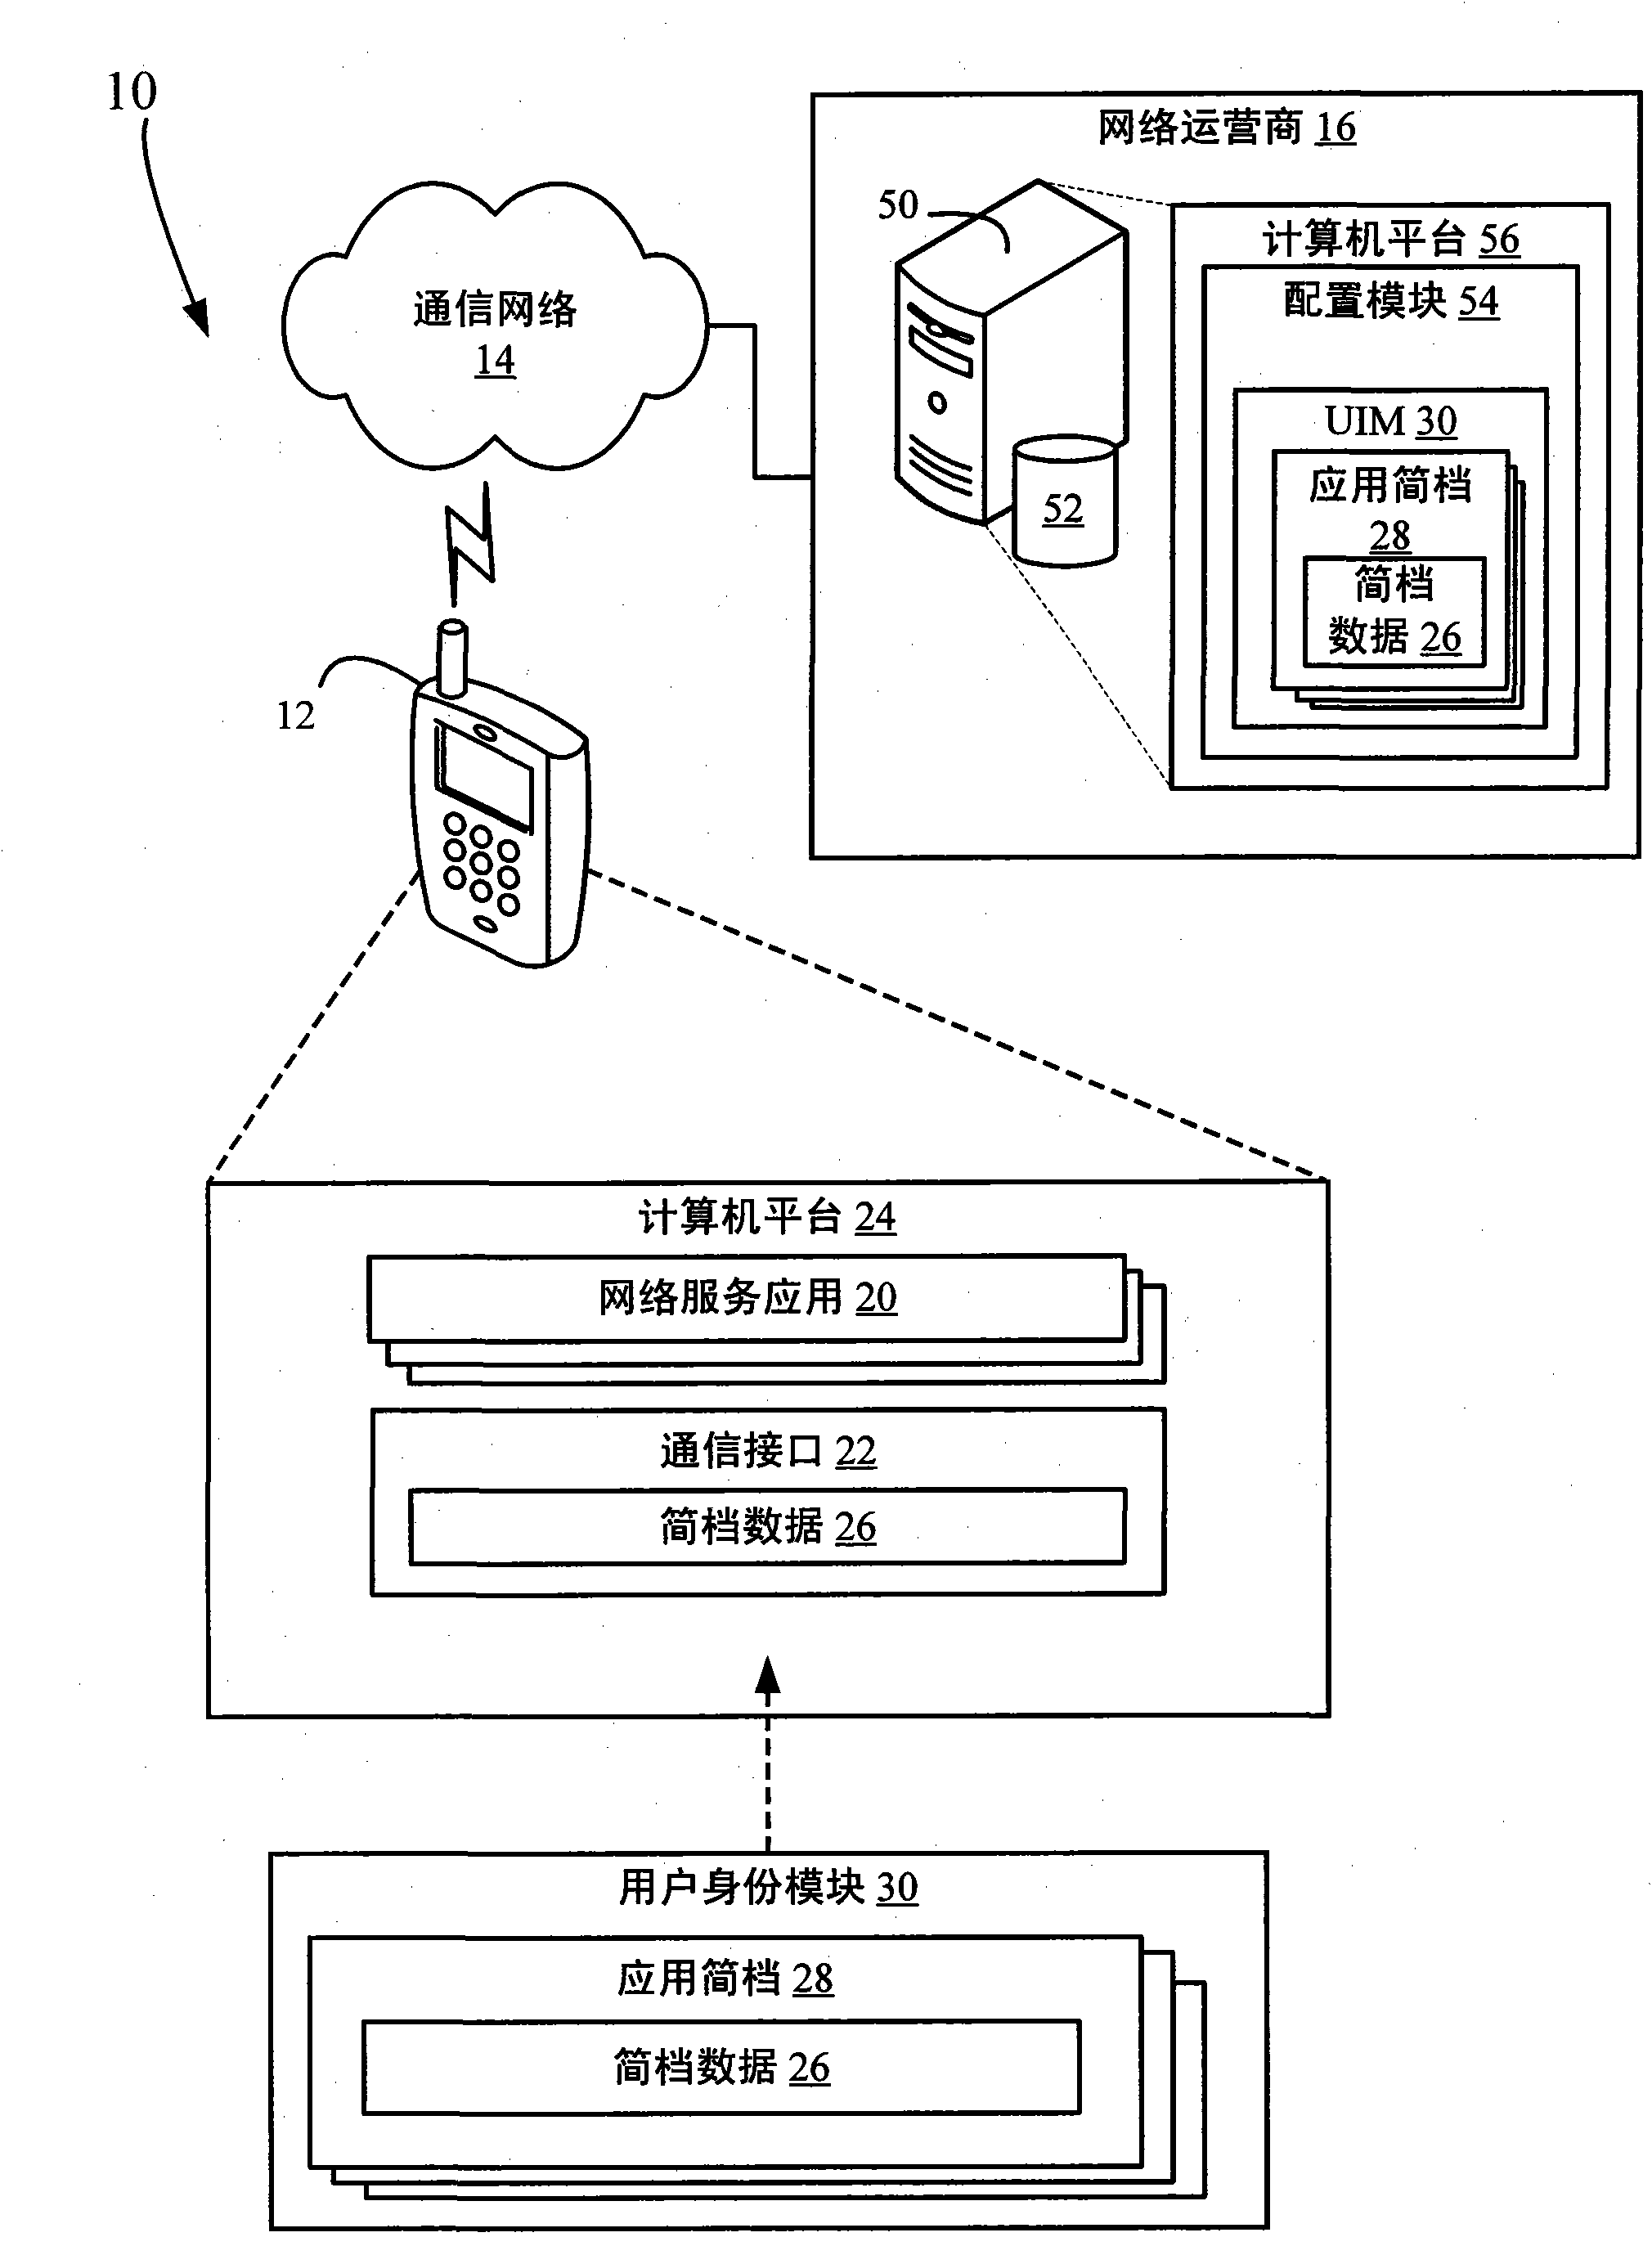 Systems and methods for provisioning wireless devices based on multiple network-service application profiles and data session conflict resolution